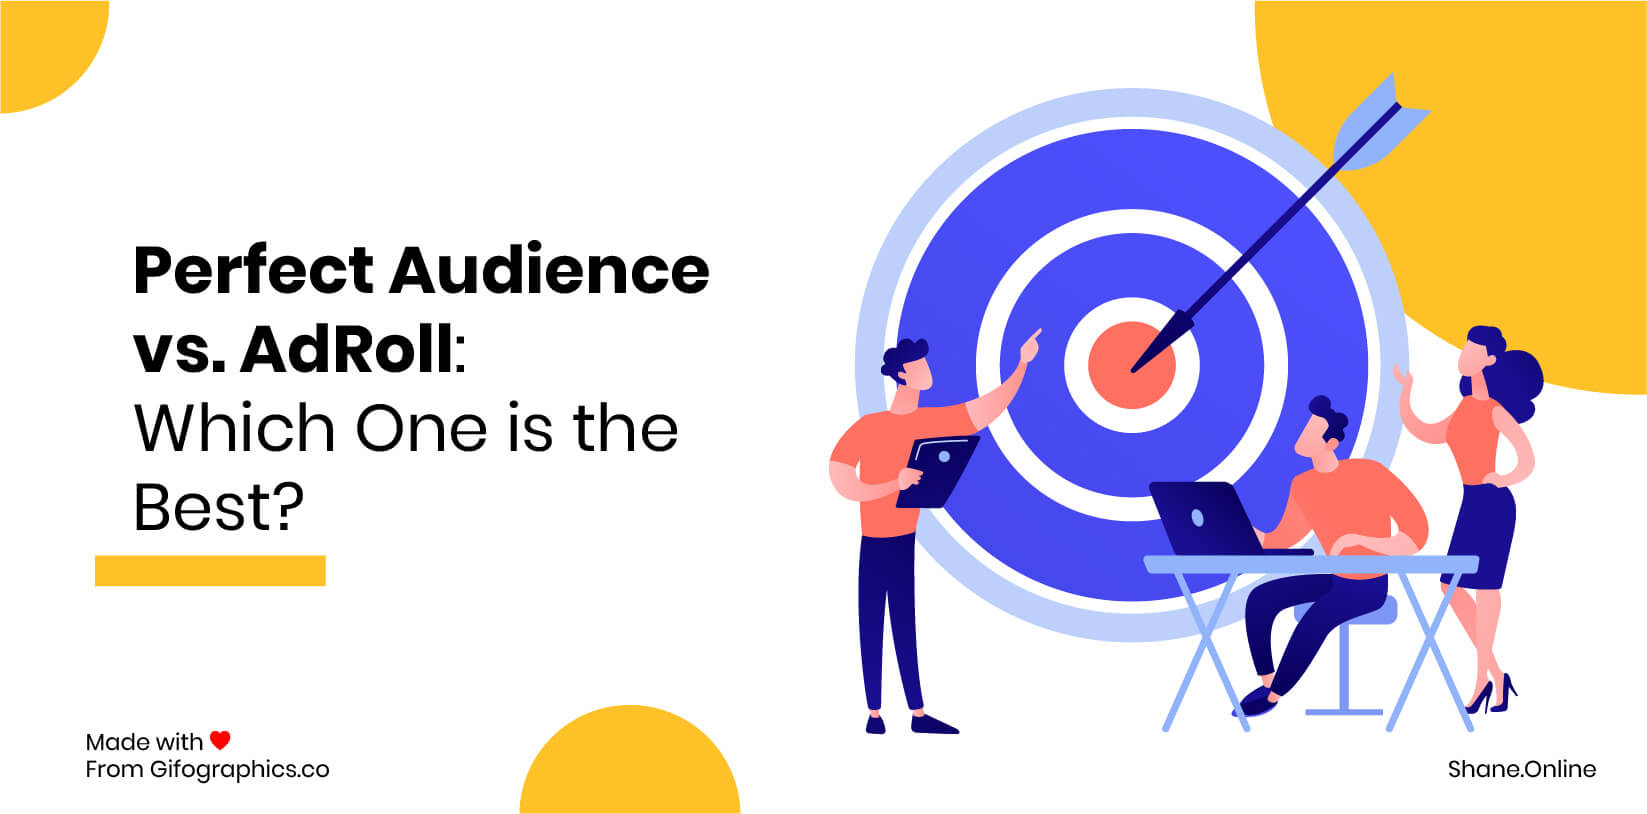 Perfect Audience vs. AdRoll: Which One is the Best?